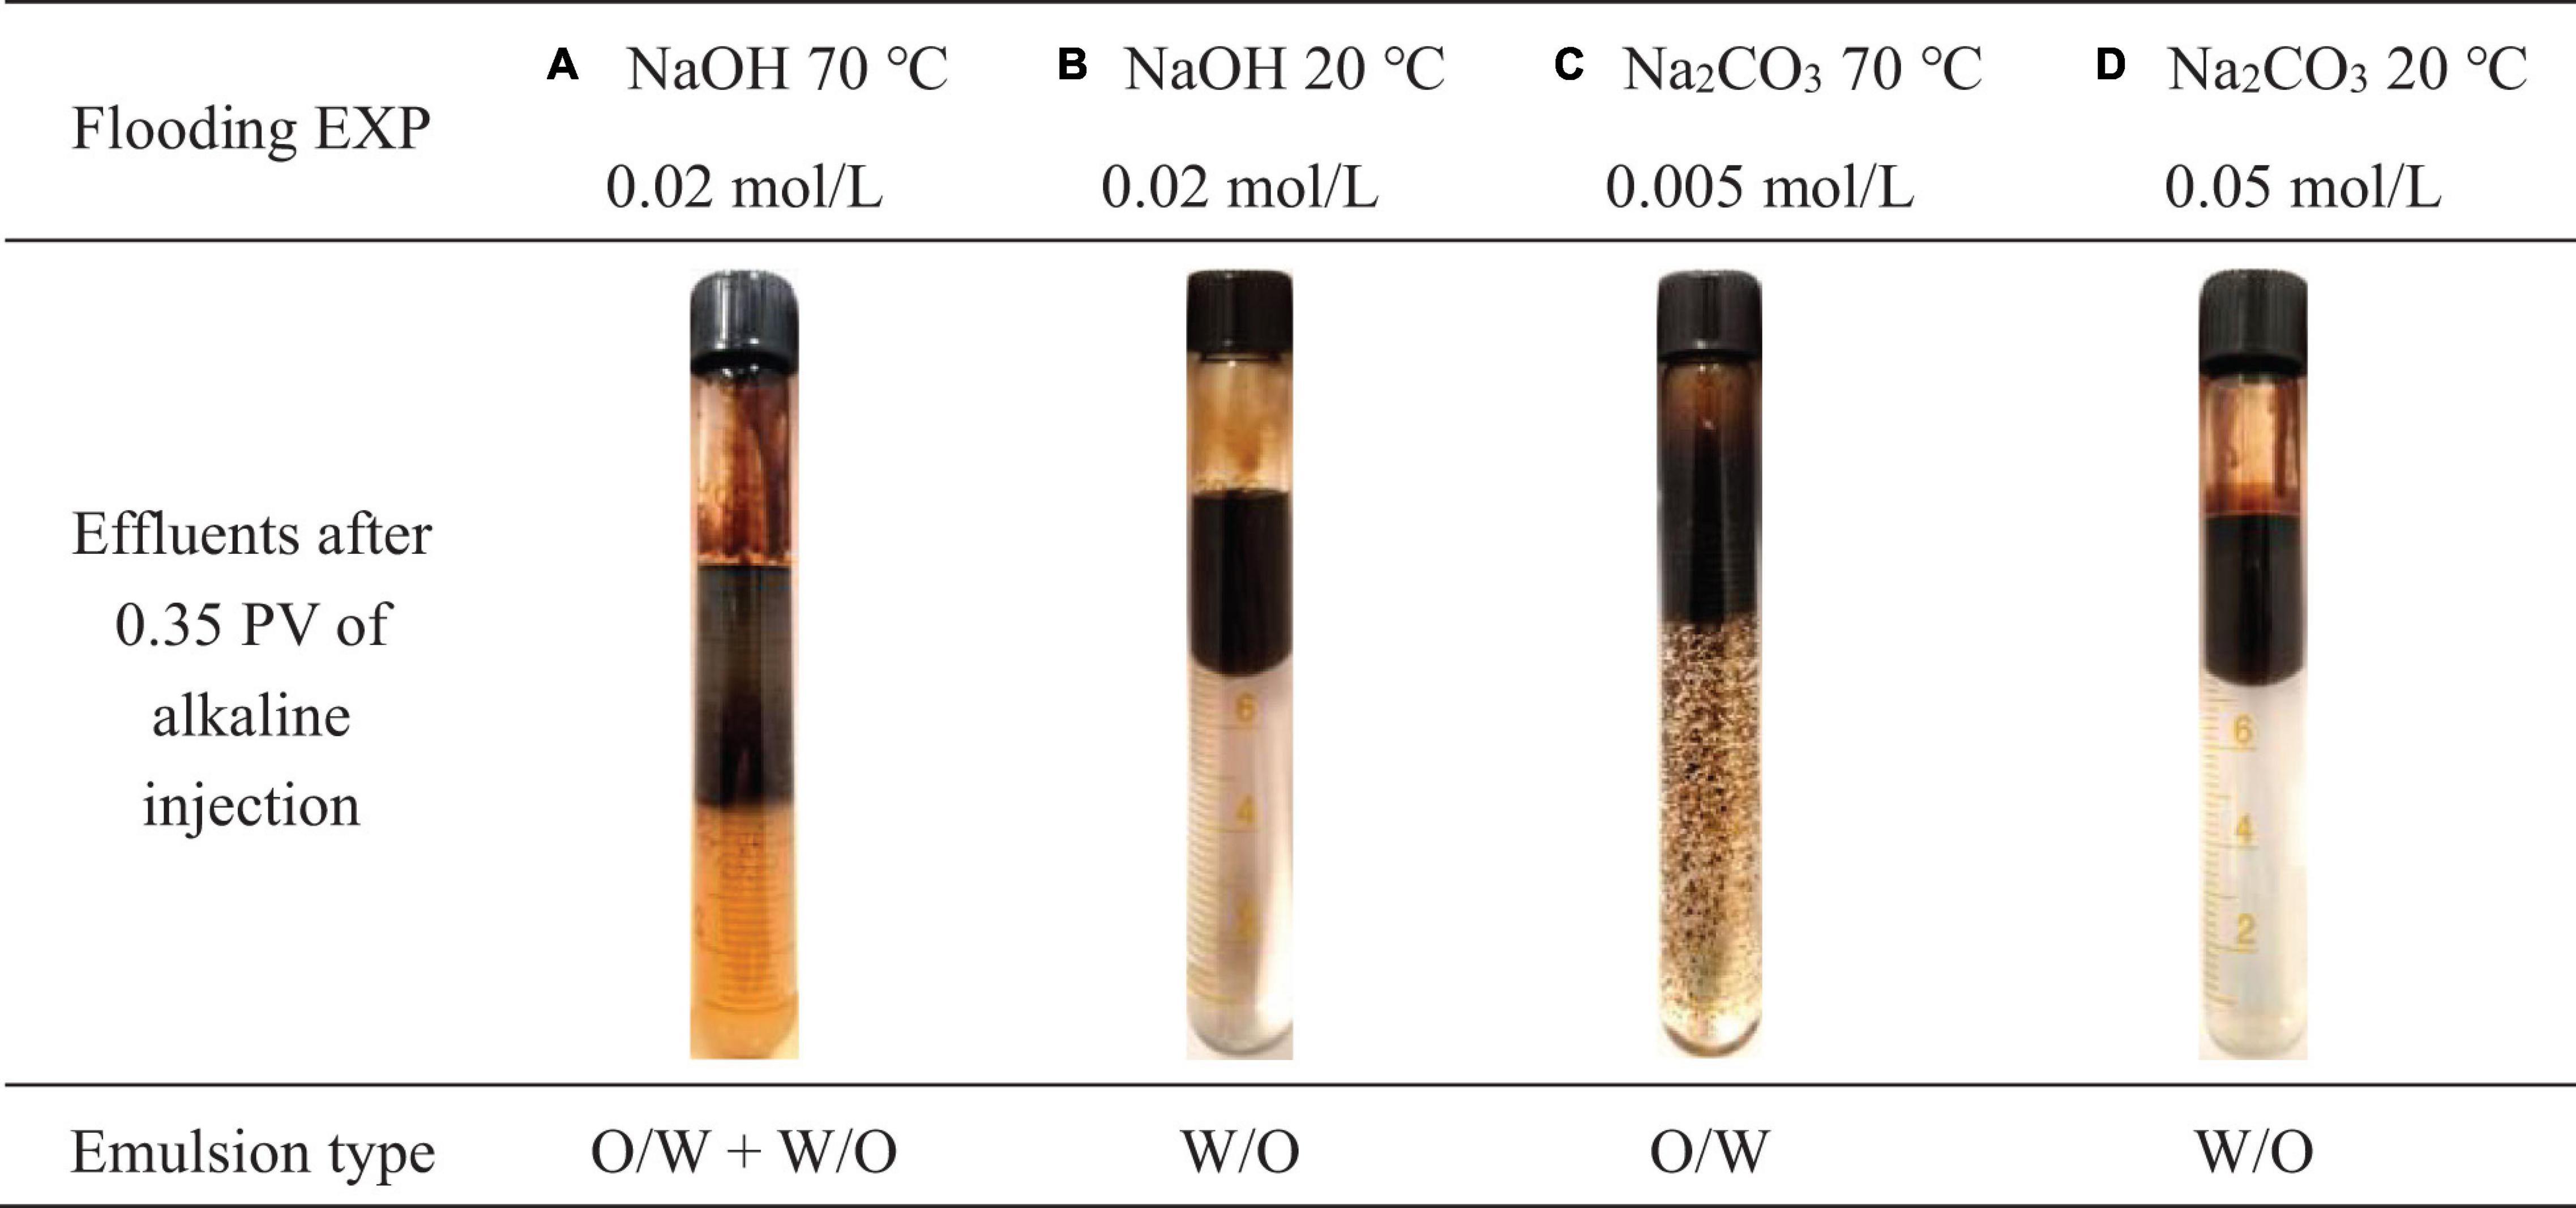 Frontiers Emulsion Characterization Of The Heavy Oil Alkaline Water System In Alkaline Flooding Mechanism Investigation Using A Combination Of Modified Bottle Test And Sandpack Flooding Energy Research